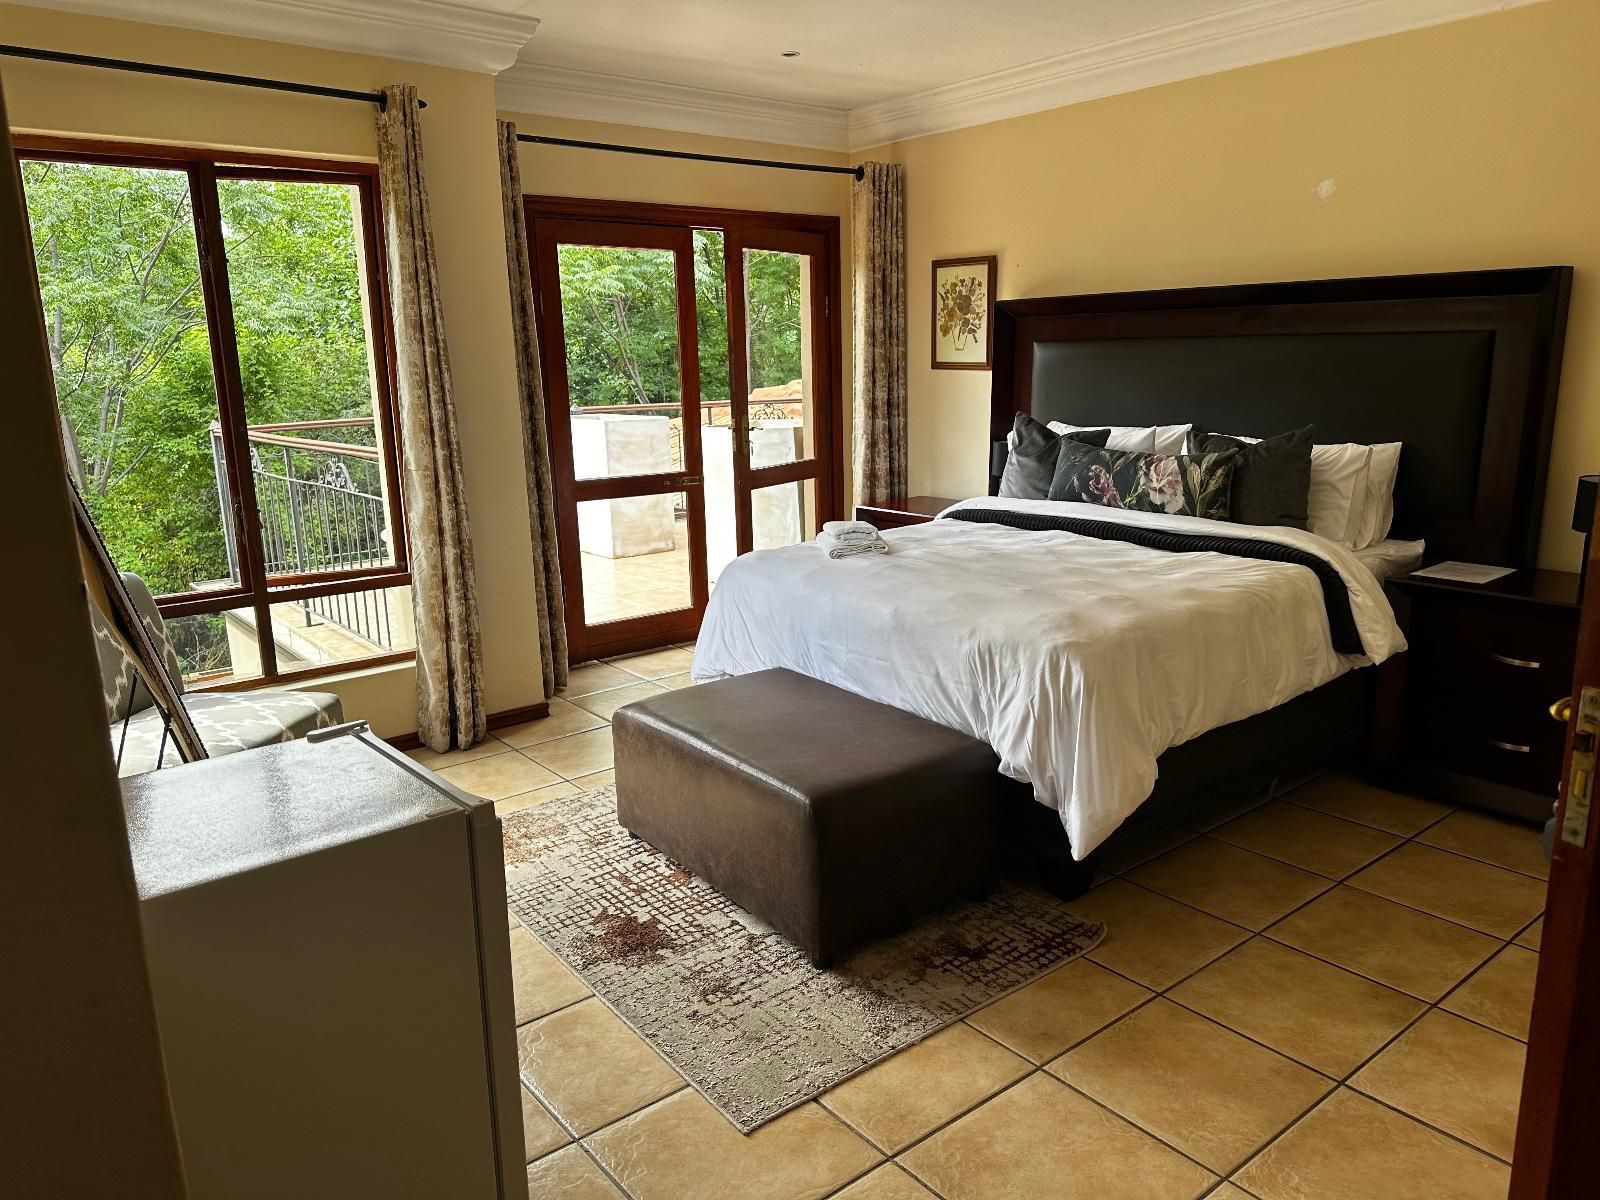 37 On Eagles Pecanwood Estate Hartbeespoort North West Province South Africa Bedroom